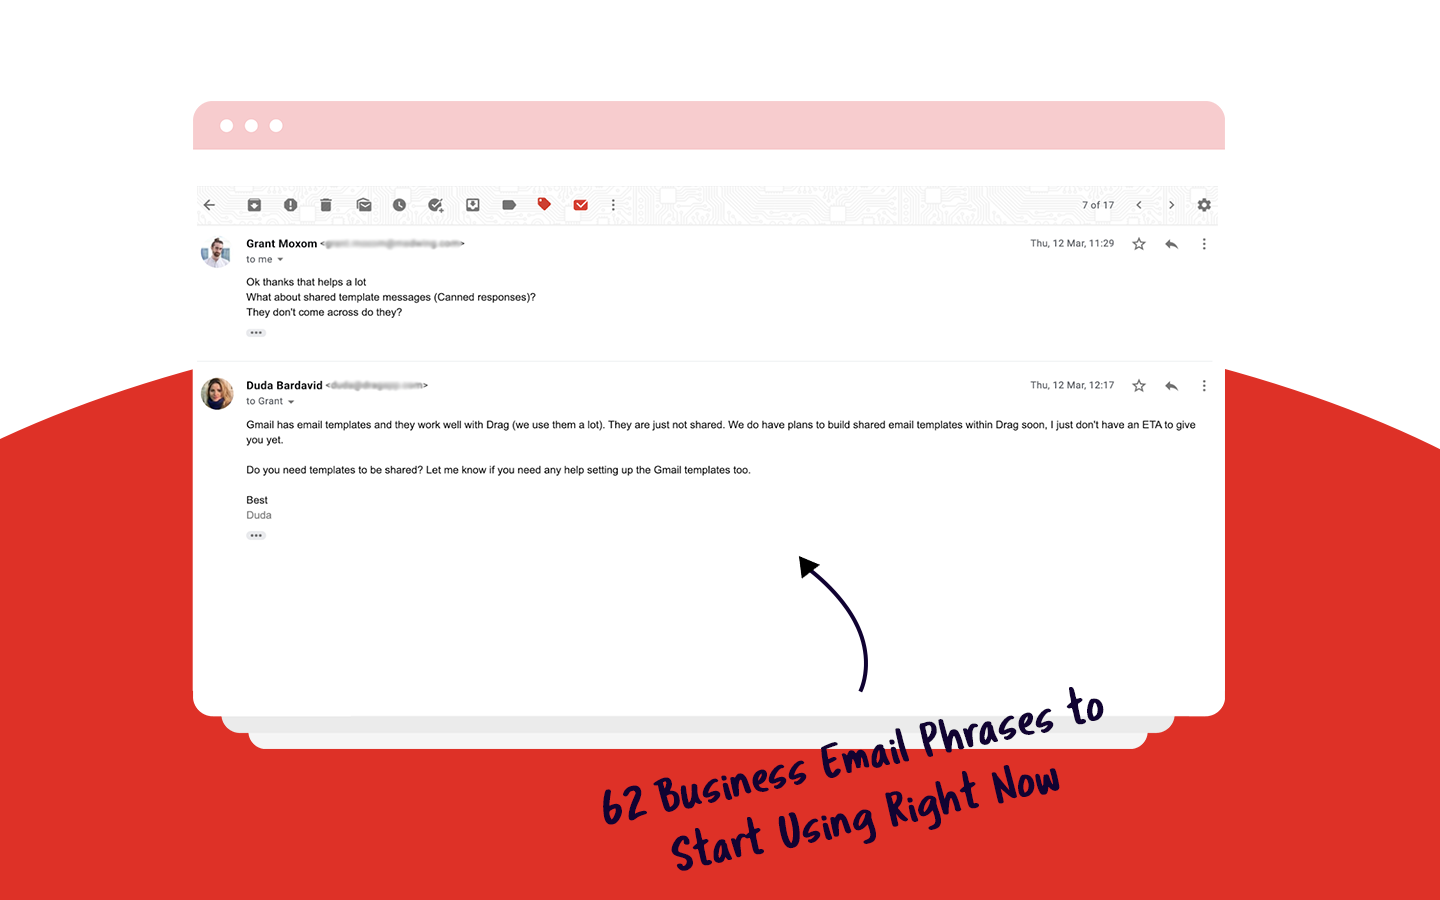 62-business-email-phrases-to-start-using-right-now-dragapp